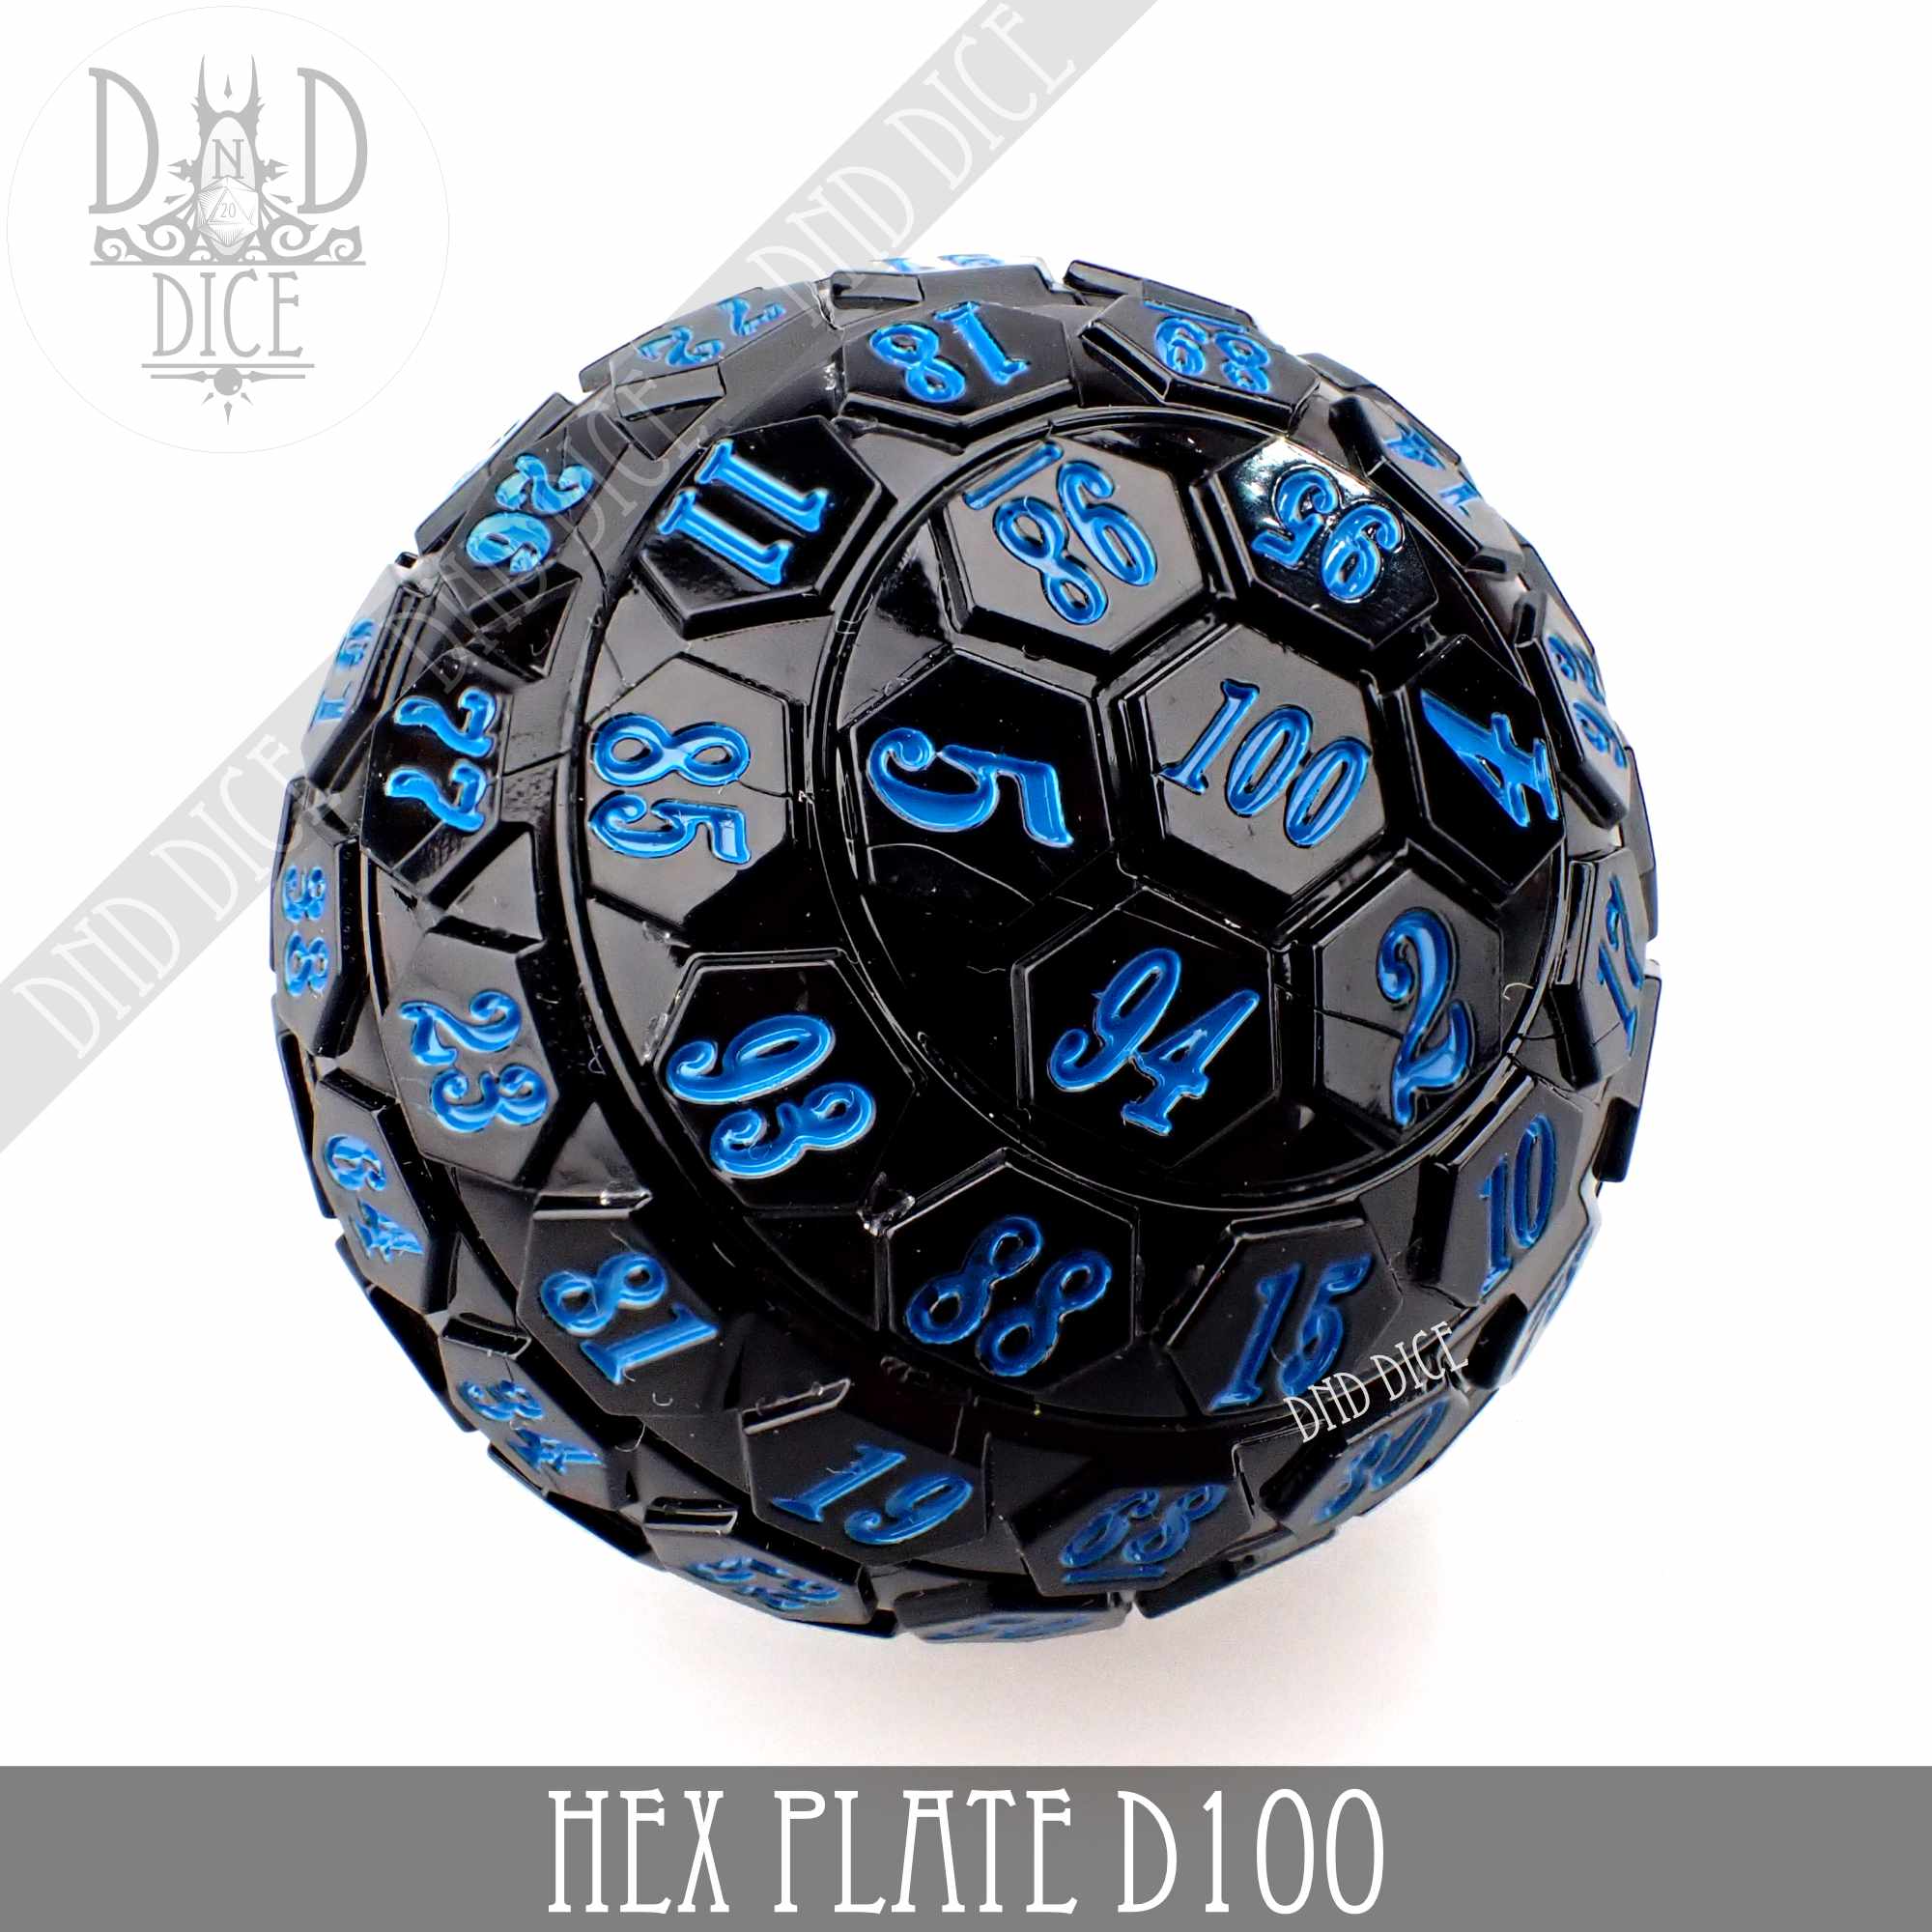 45mm Hex Plate D100 (Black with Blue)